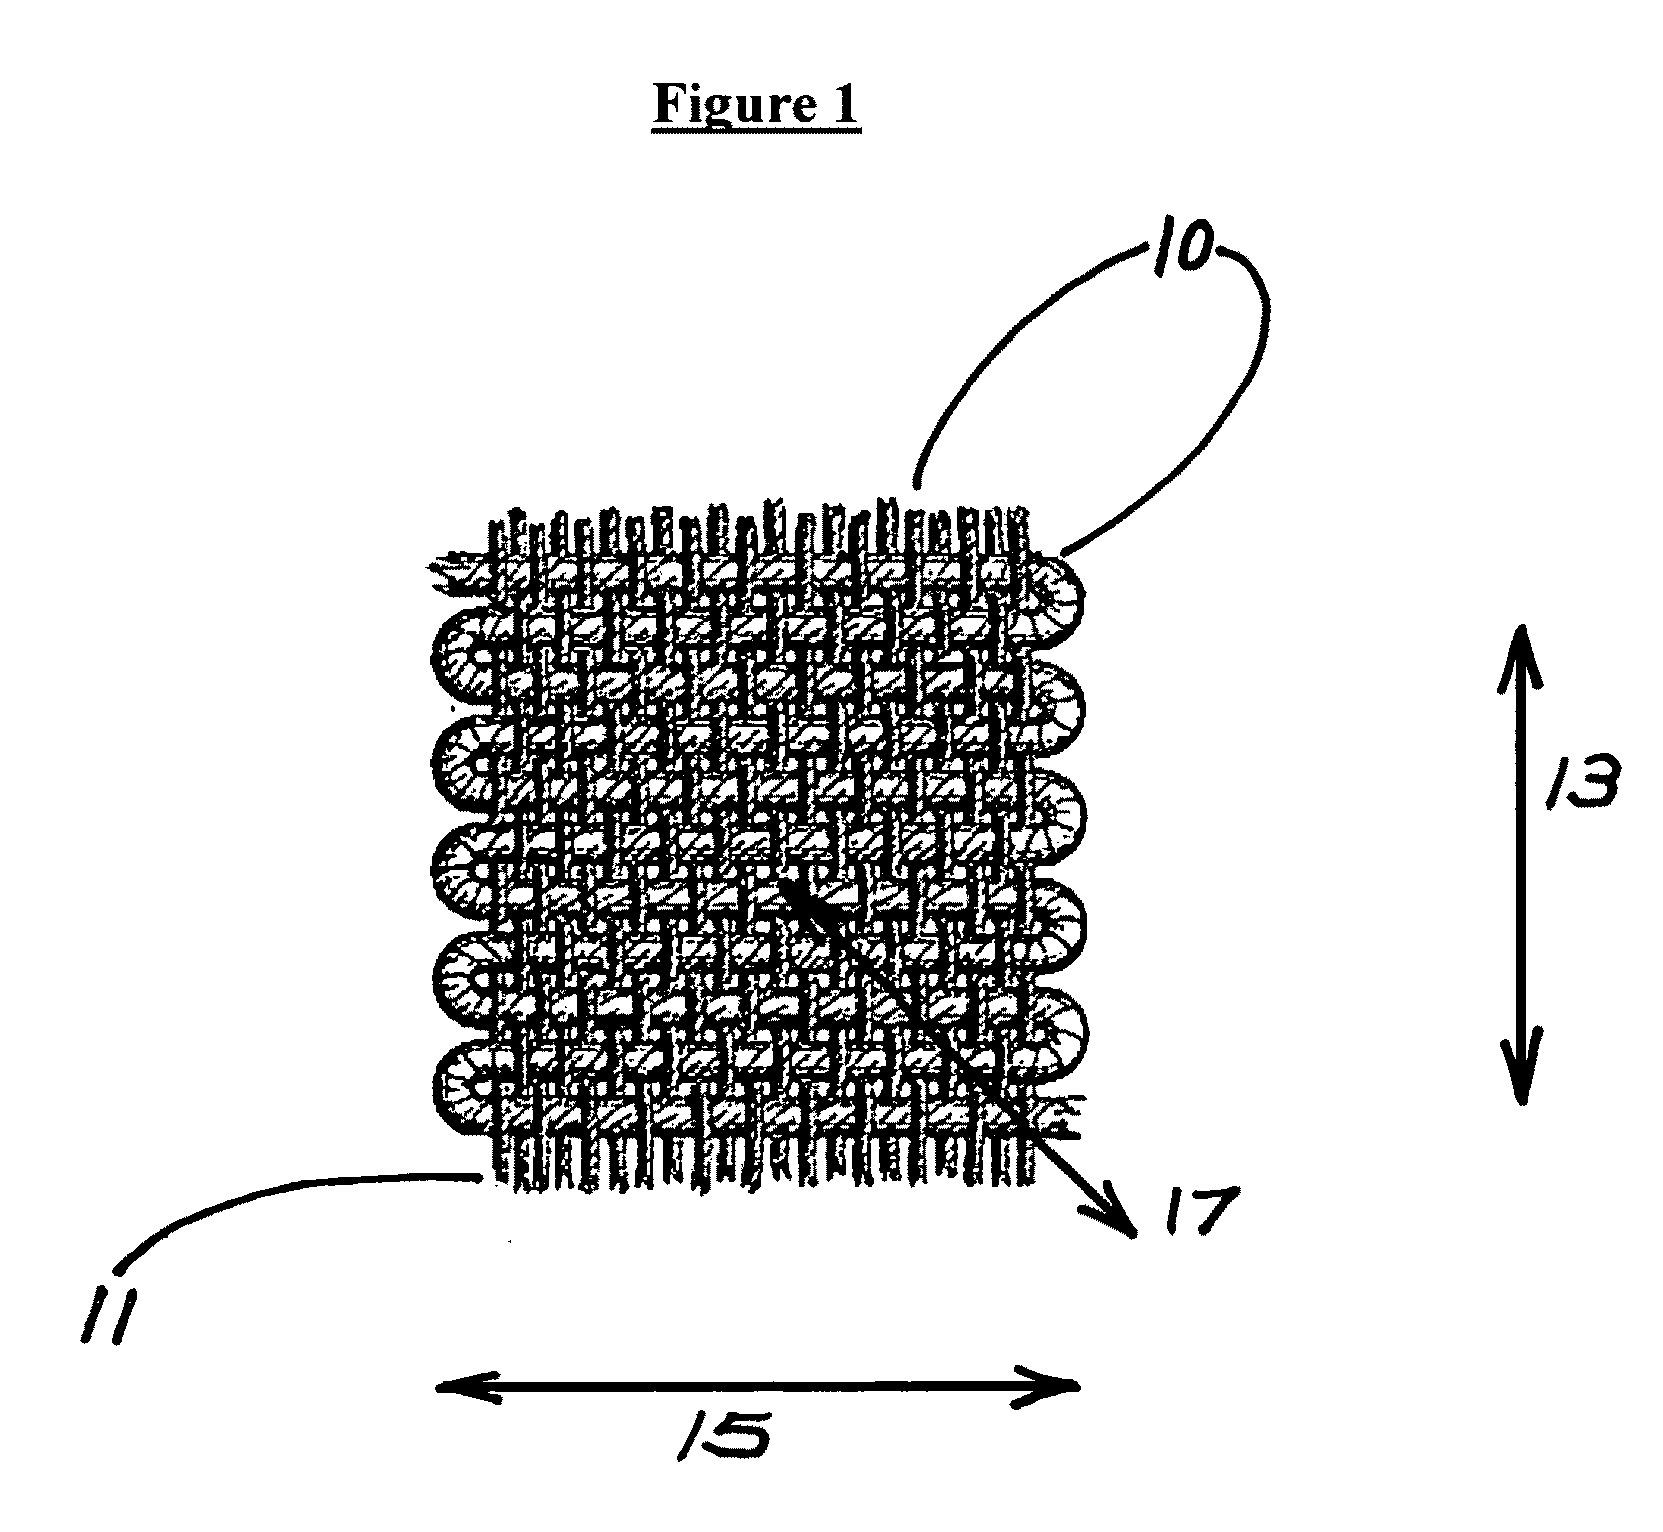 Highly conformable adhesive device for compound, moving or variable forms